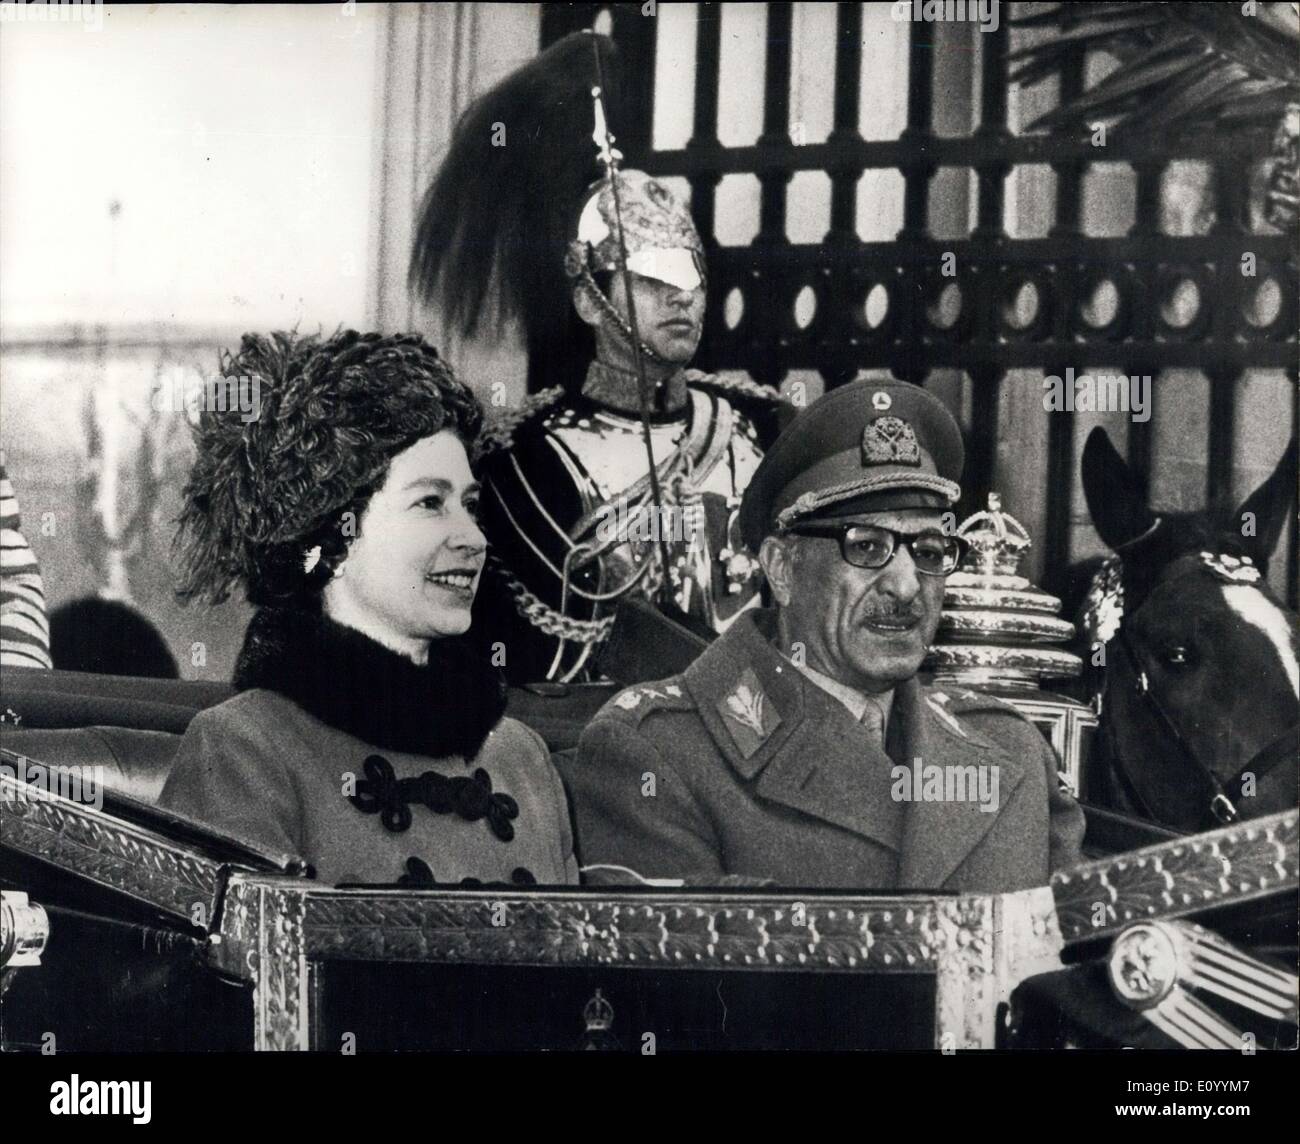 Dec. 07, 1971 - King Of Afghanistan om State Visit.: King Muhammad Zahir Shah, of Afghanistan arrived in London today, accompanied by his daughter, Princess Bilquis, on a State Visit. Queen Homaira has been prevented by illness from travelling with her husband. H.M. Queen Elizabeth was at Victoria Station to greet the Royal visitors. Photo shows H.M. The Queen and King Muhammad Zahir Shah drive through the forecourt of Buckingham Palace in the open state carriage,after the procession from Victoria Station. Stock Photo